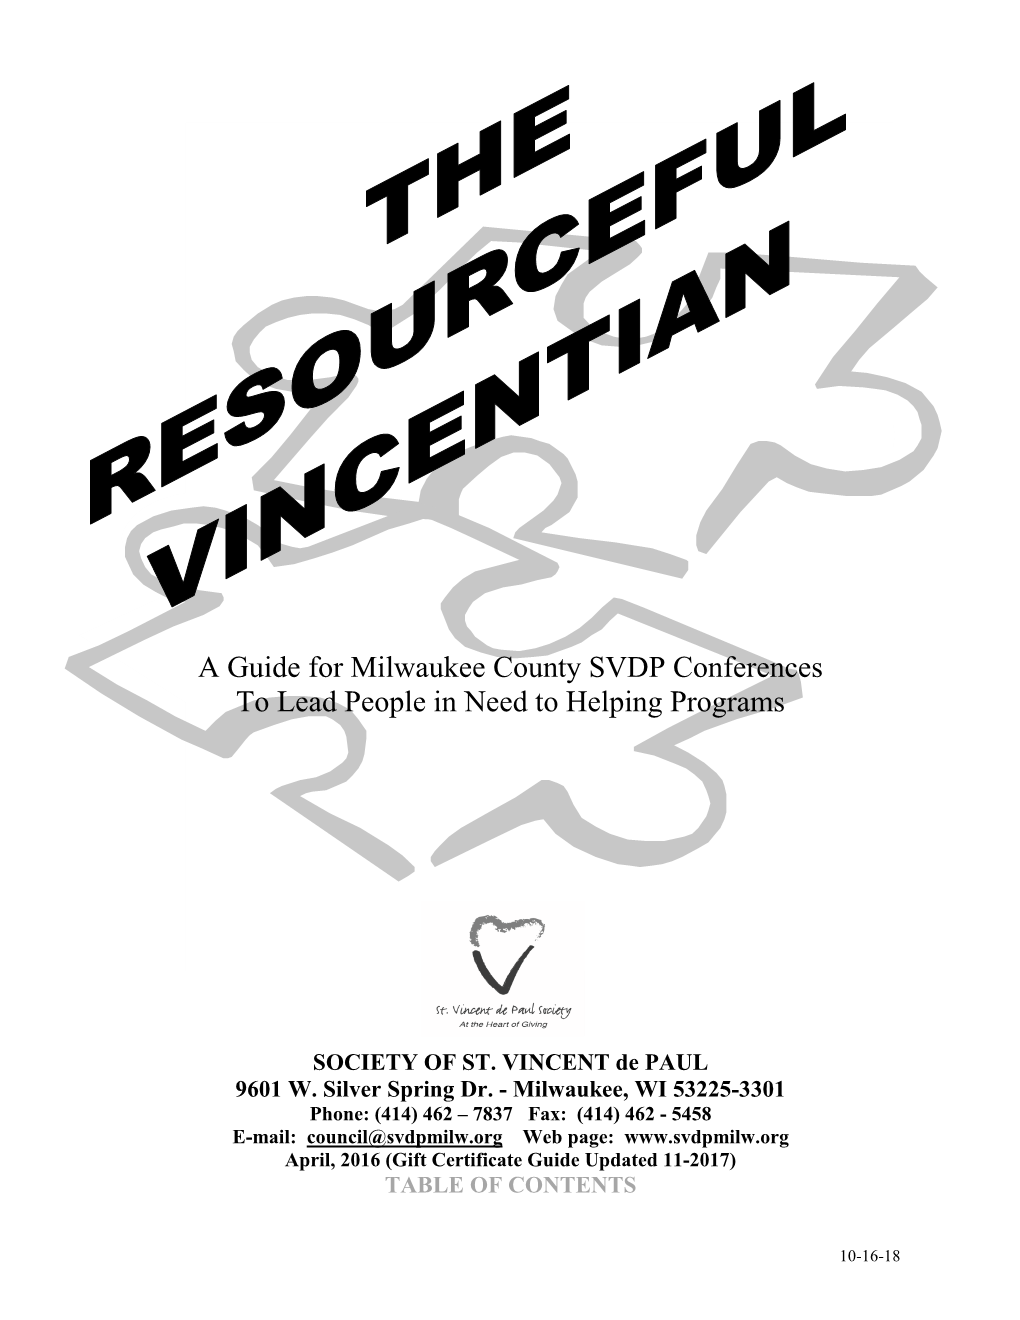 A Guide for Milwaukee County SVDP Conferences to Lead People in Need to Helping Programs